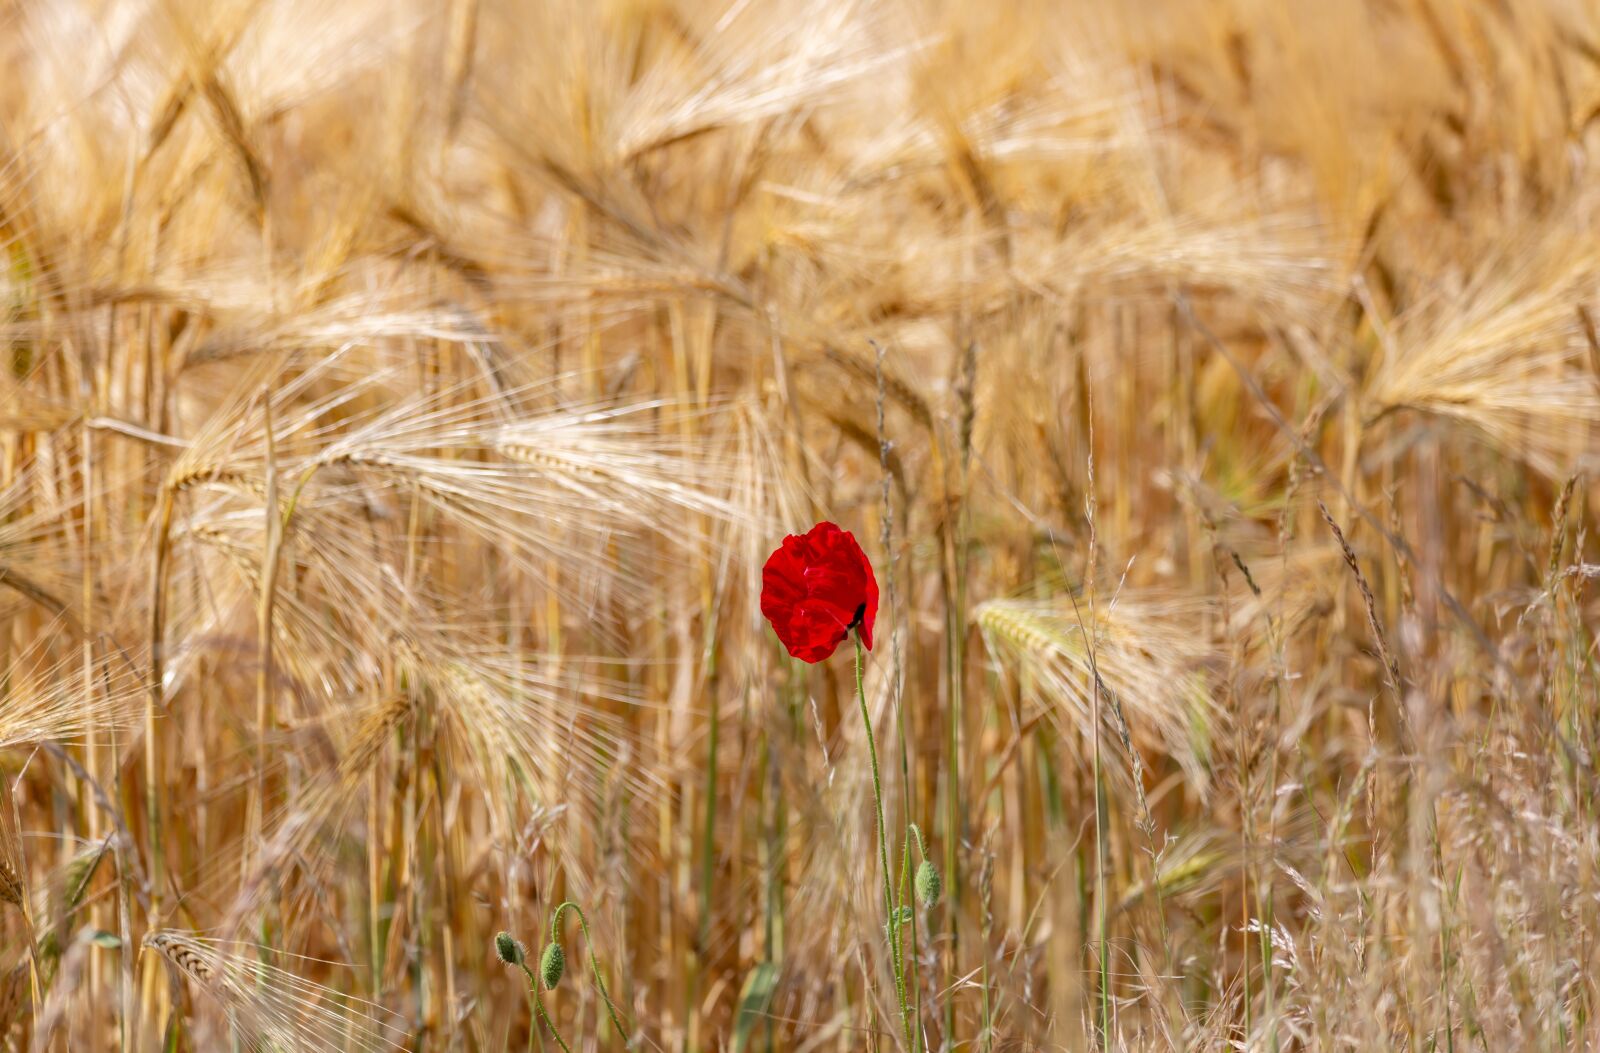 150-600mm F5-6.3 DG OS HSM | Contemporary 015 sample photo. Poppy, barley field, red photography